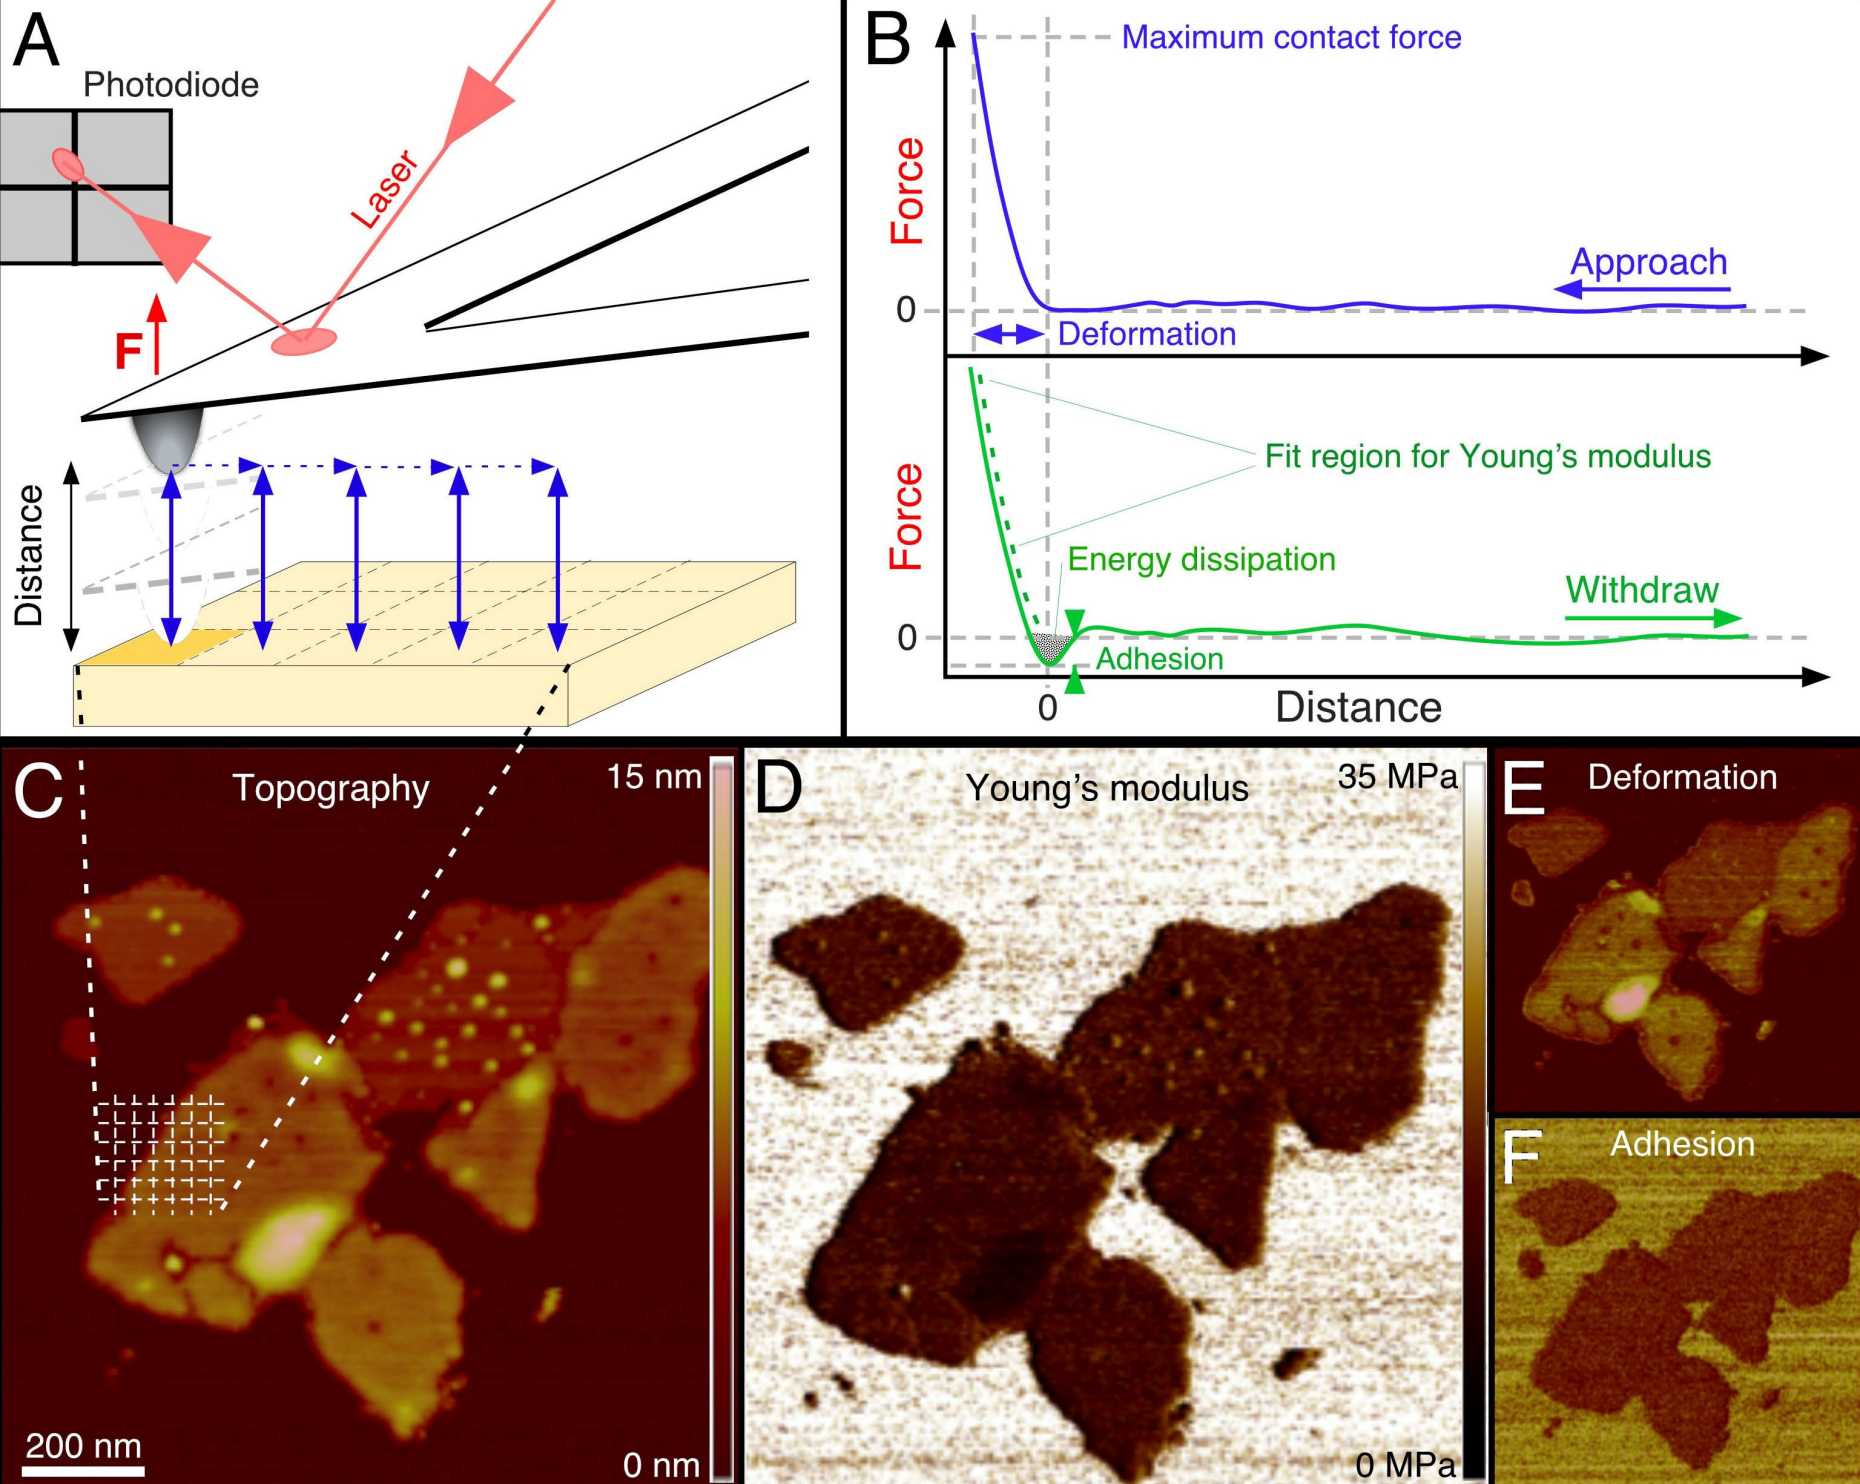 FD curve–based AFM reveals topography and quantitative maps of multiple properties of biological samples. (A)  FD-based AFM approaches the microscope tip to the sample and withdraws it in a pixel-for-pixel manner to record interaction forces F over the tip-sample distance in FD curves. The high precision of the approach allows detection of pixel sizes <1 nm2 with a positional accuracy of ~0.2 nm and forces at piconewton sensitivity. (B) Approach (blue) and withdrawal (green) FD curves. Zero indicates the contact point of tip and sample. Highlighted are some parameters that can be extracted from FD curves: distance (sample height) at maximum contact force, deformation, elasticity (Young’s modulus), energy dissipation and adhesion. (C) FD-based AFM topography and directly correlated multiparametric maps of native purple membrane adsorbed onto mica and imaged in buffer solution. Analyzing the FD curves allows extraction of the sample topography and mapping of parameters including the elasticity, deformation and adhesion. Scale bars, 200 nm. Figure adapted from Dufrene et al. Nature Methods (2015) 10, 847-854.